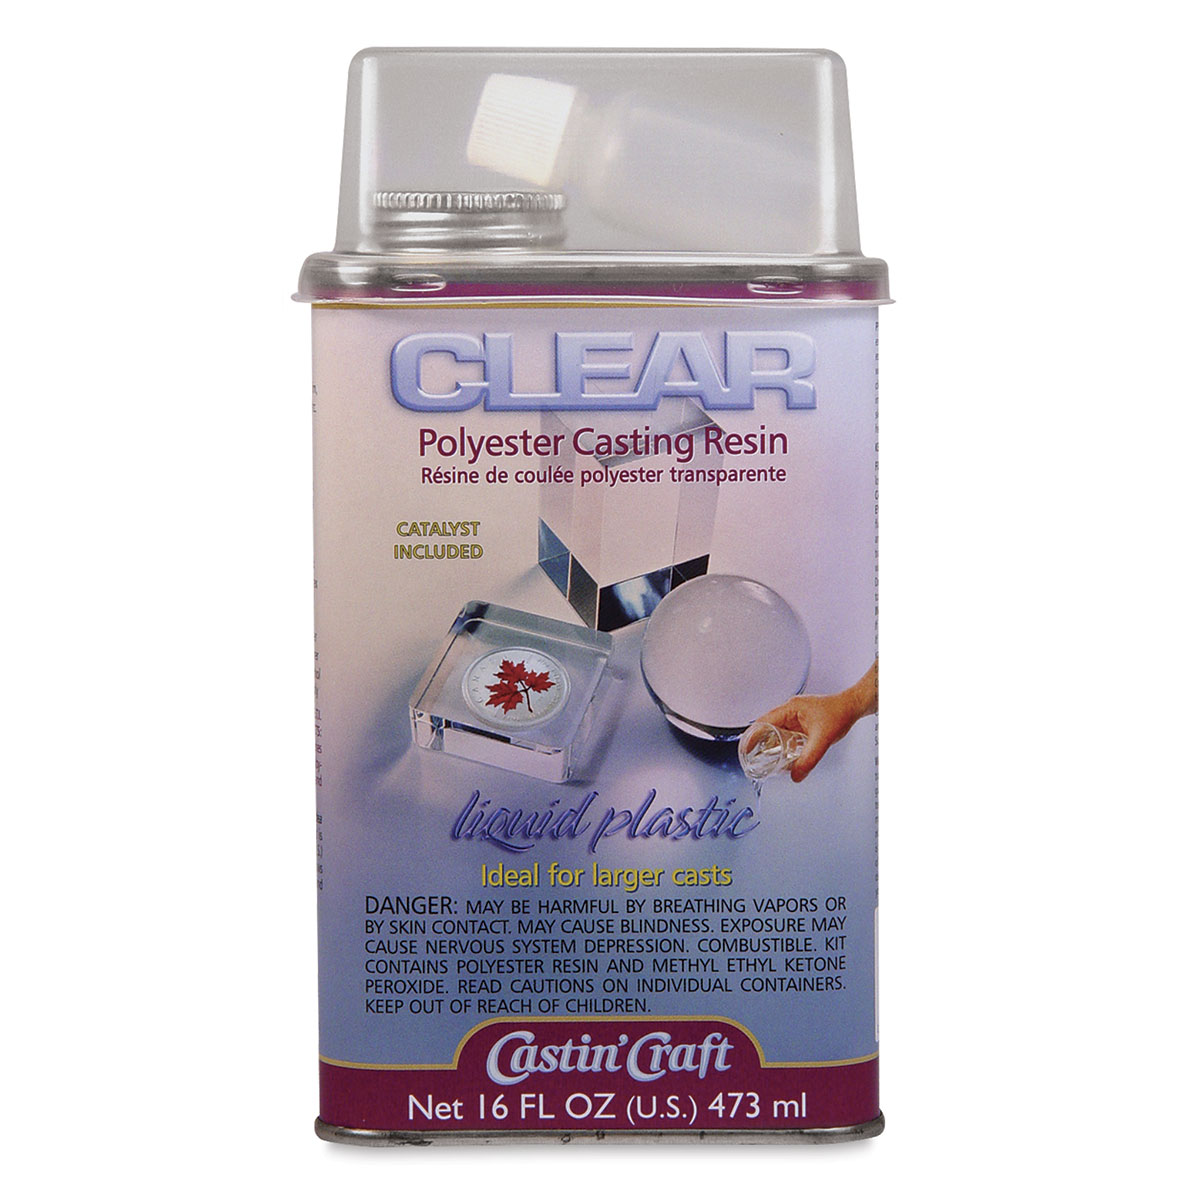 castin craft resin review